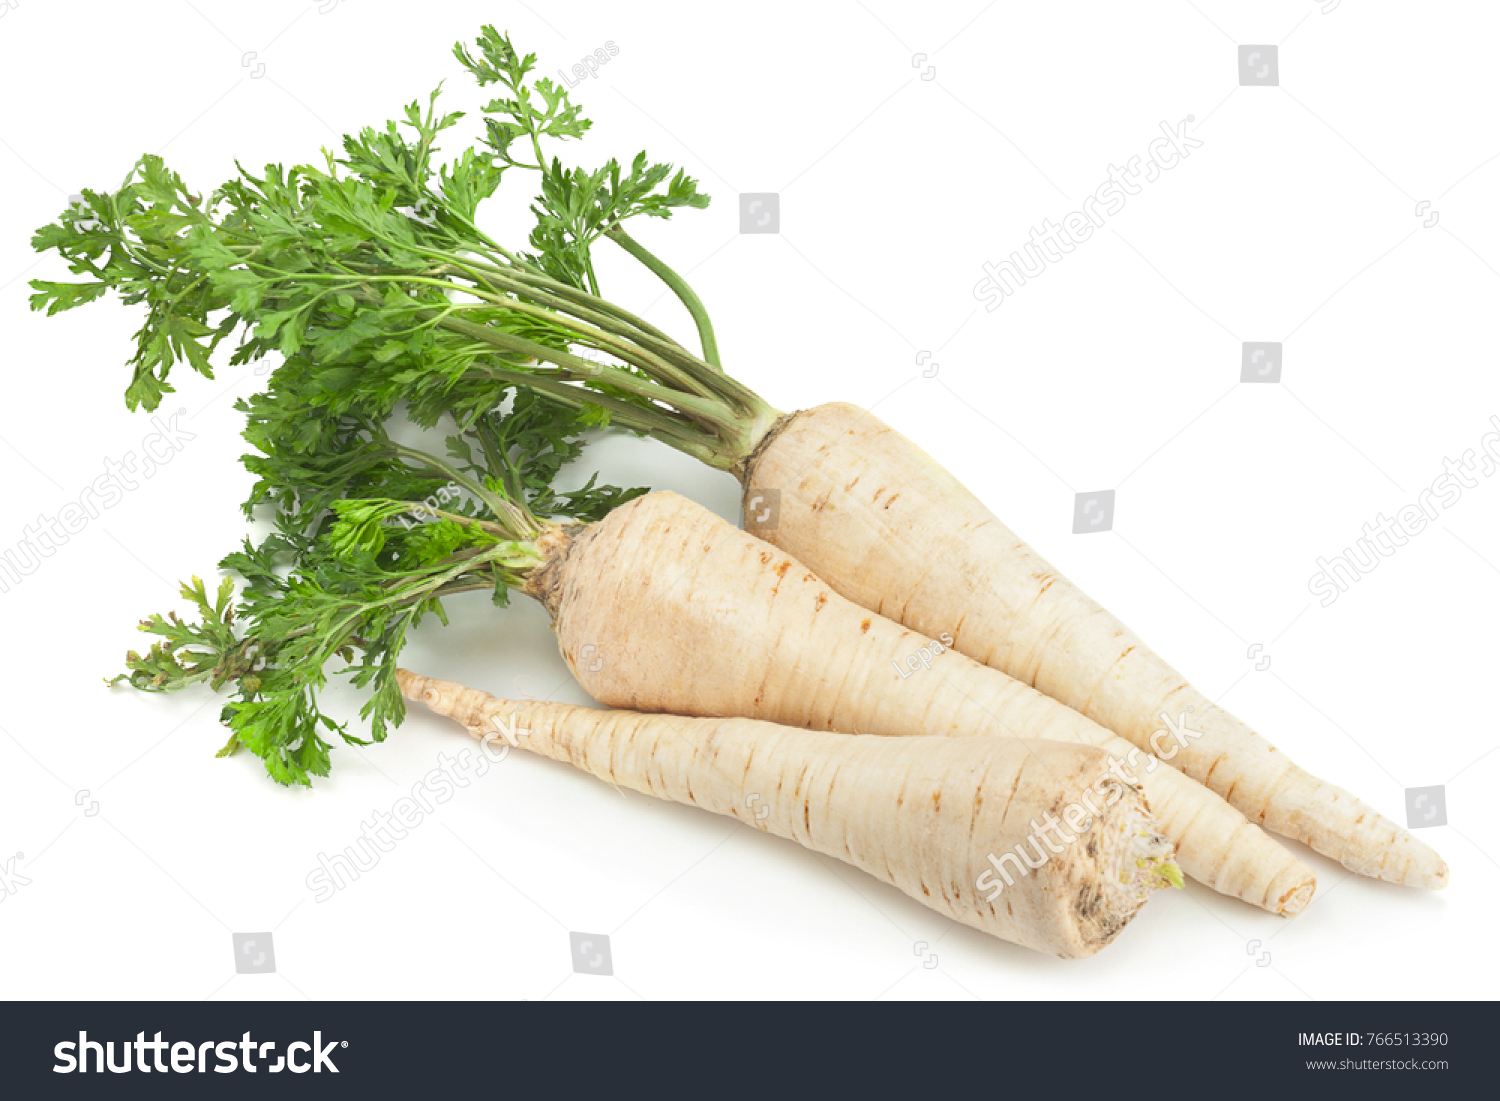 Parsnip root with leaf isolated on white background #766513390